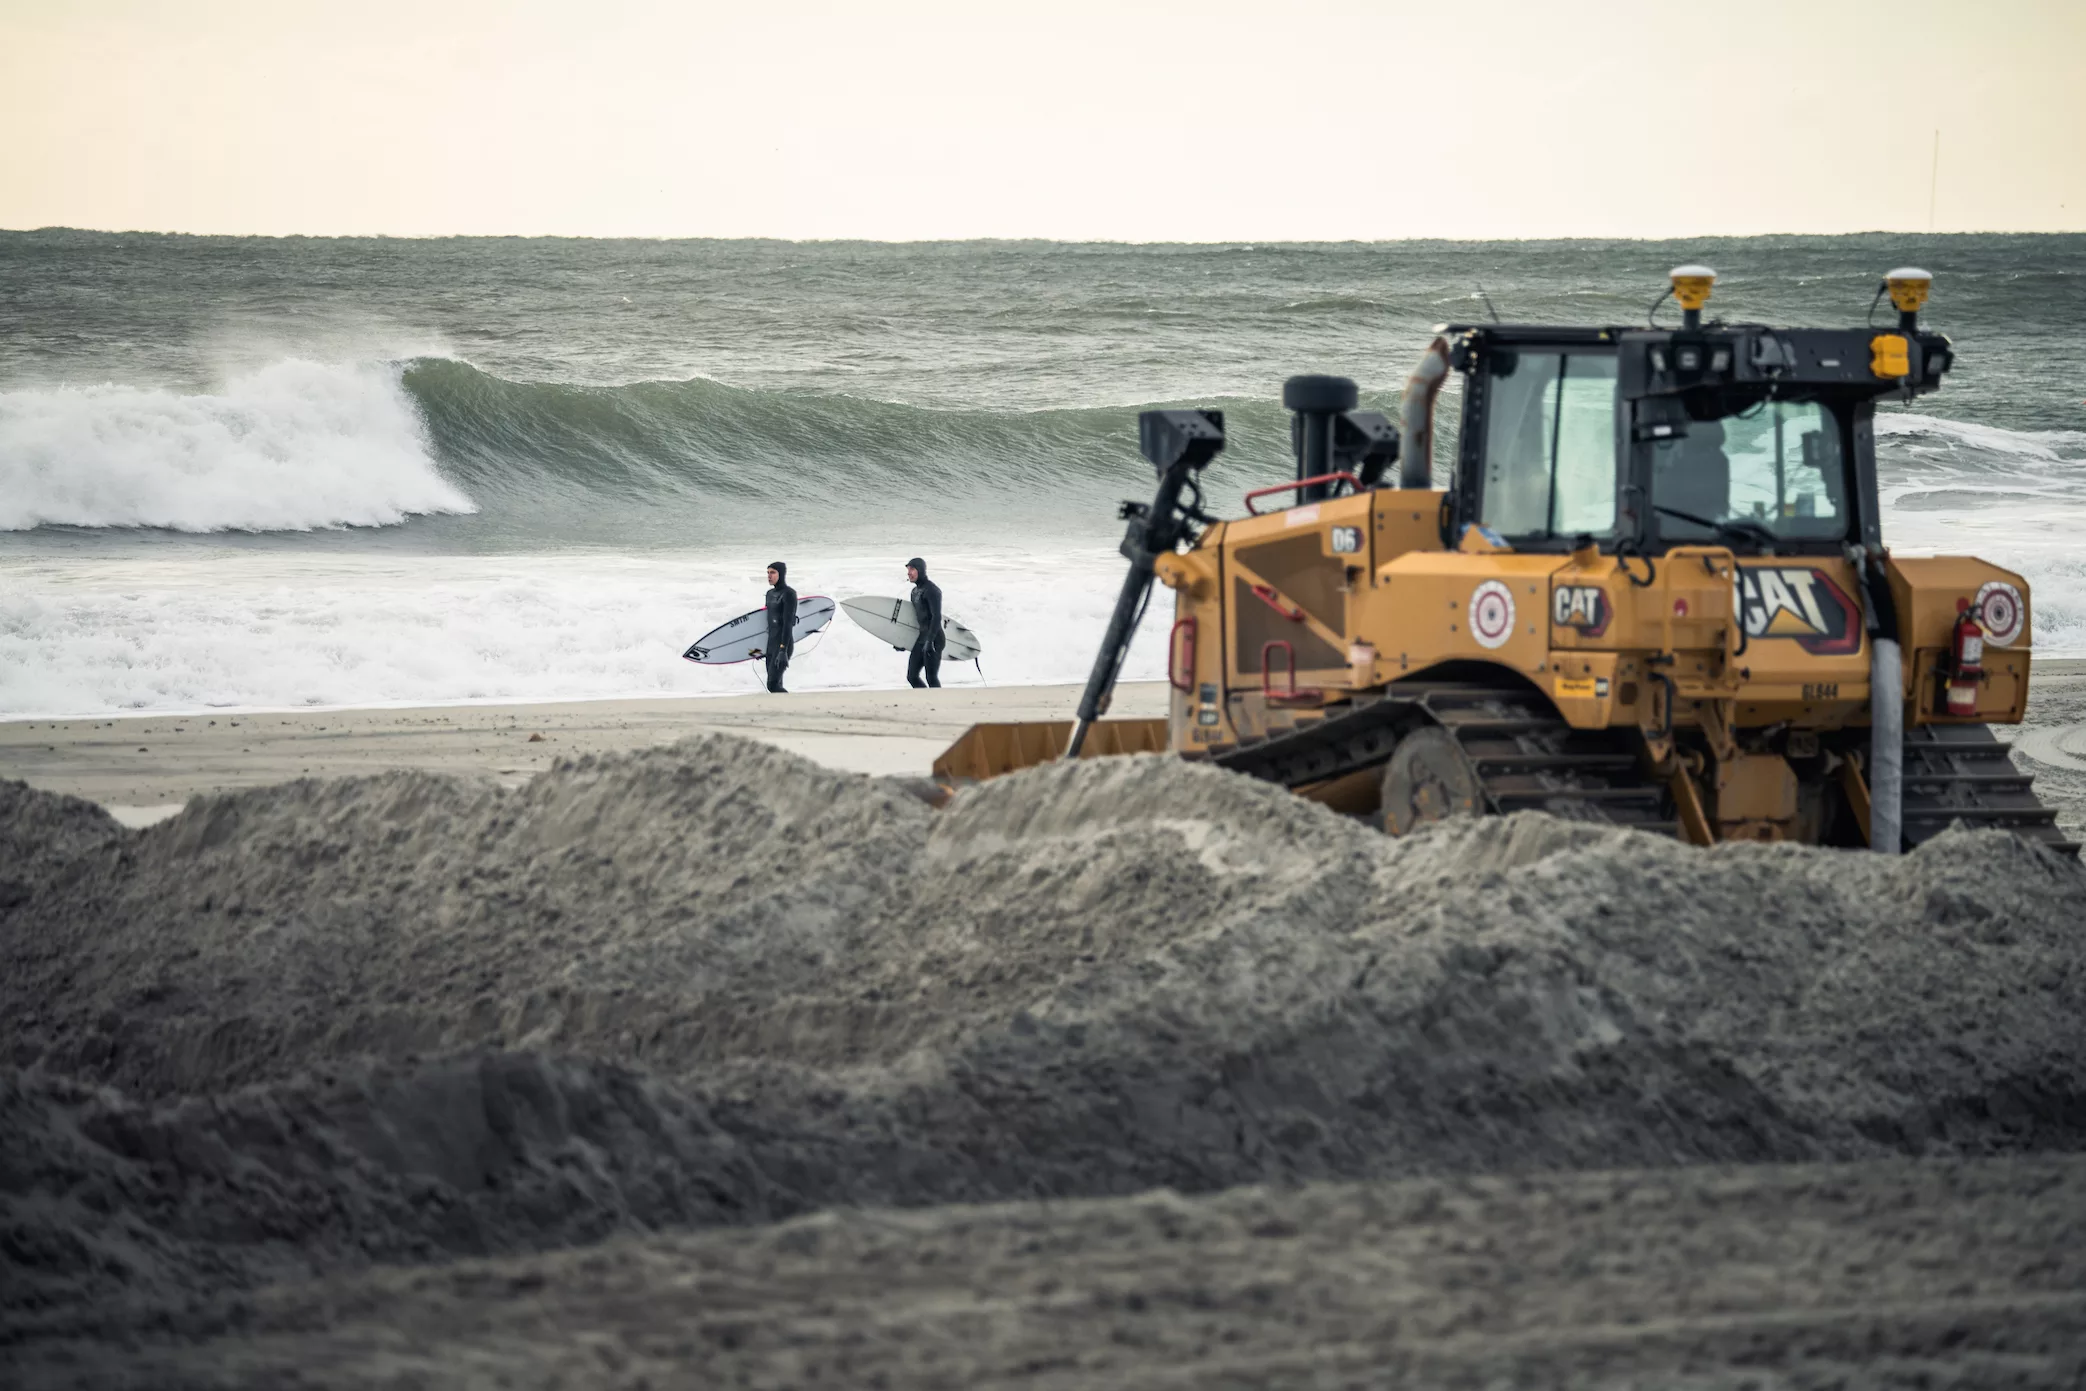 Bulldozer with surfers looking at the waves wallpaper cool surf pic